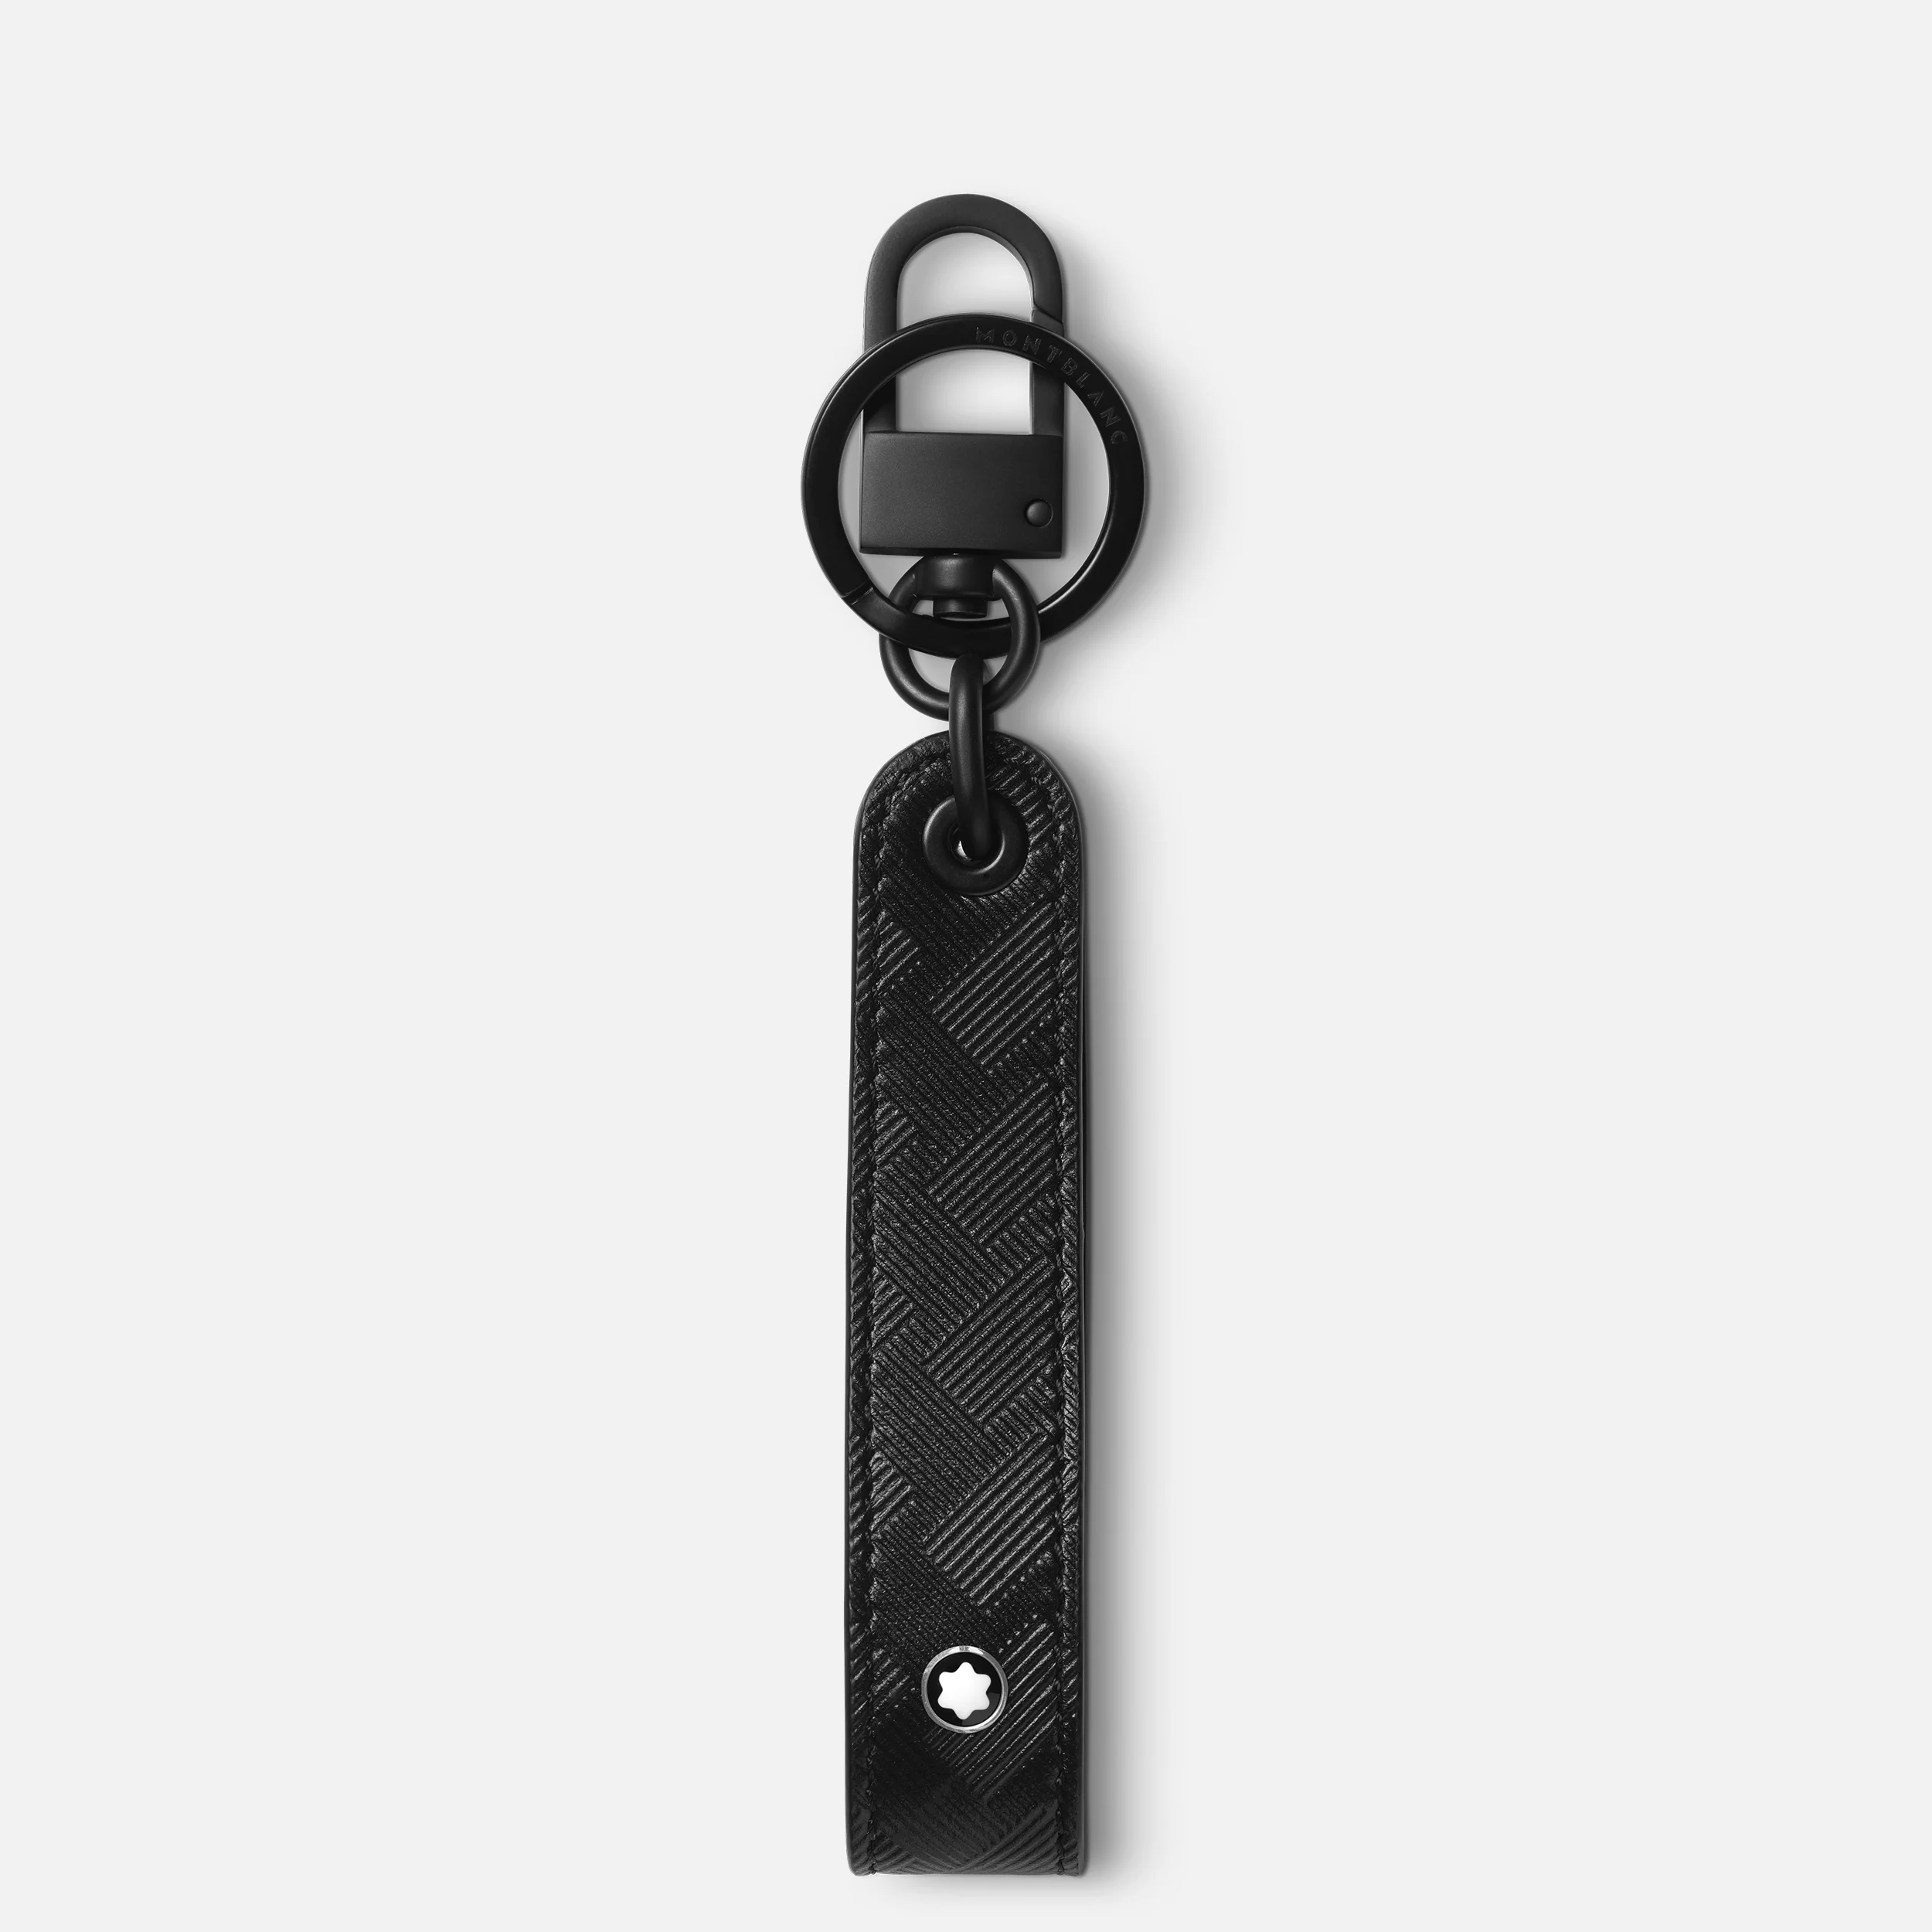 Montblanc Extreme 3.0 Key Fob - Pencraft the boutique